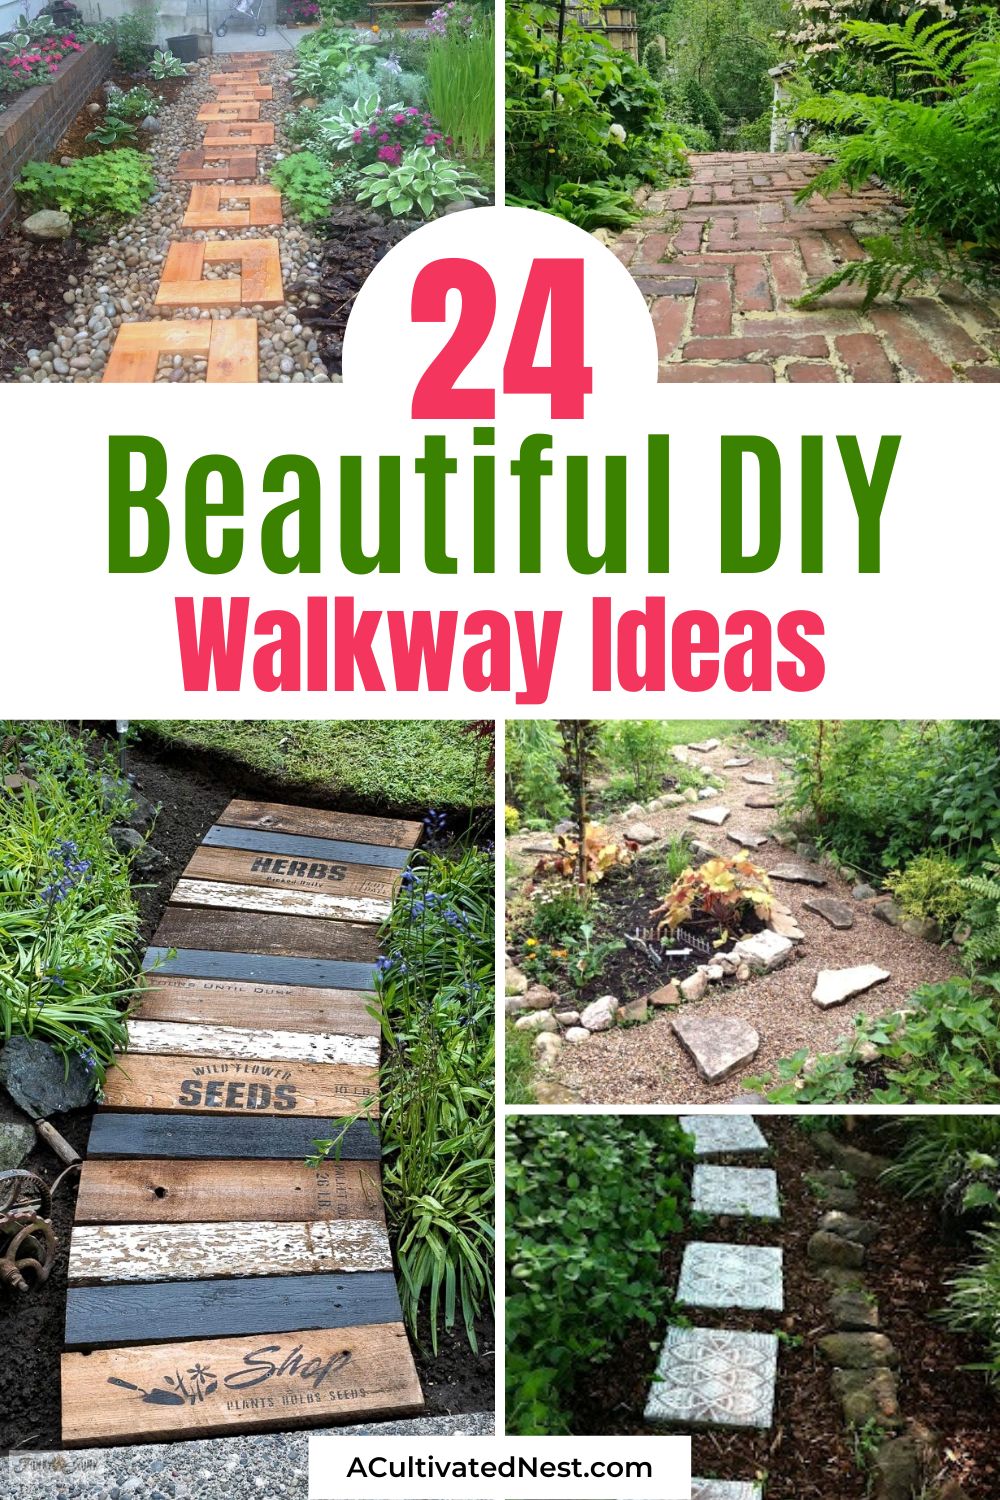 24 Beautiful DIY Walkways Ideas- If you want to add some functional beauty to your yard, then you'll love these gorgeous DIY walkway ideas. There are so many easy ways to make your own DIY pathways! | #yardDecor #DIY #diyProjects #backyardDIYs #ACultivatedNest